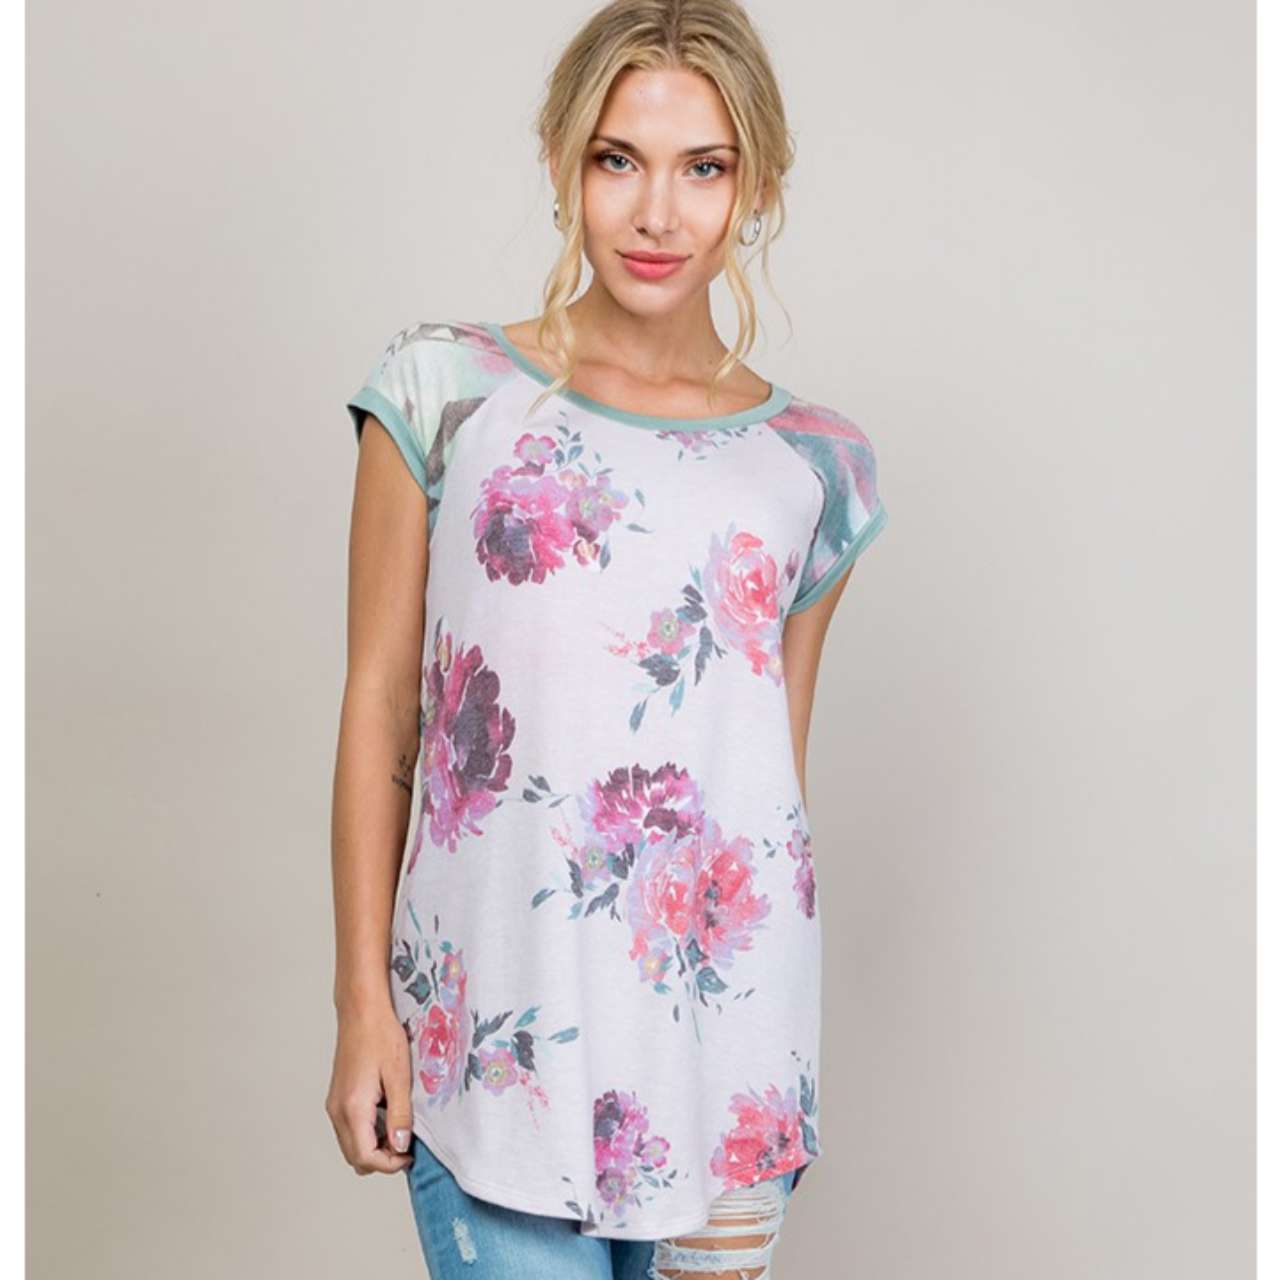 Gracie Floral Top - Plus Size - The Graphic Tee